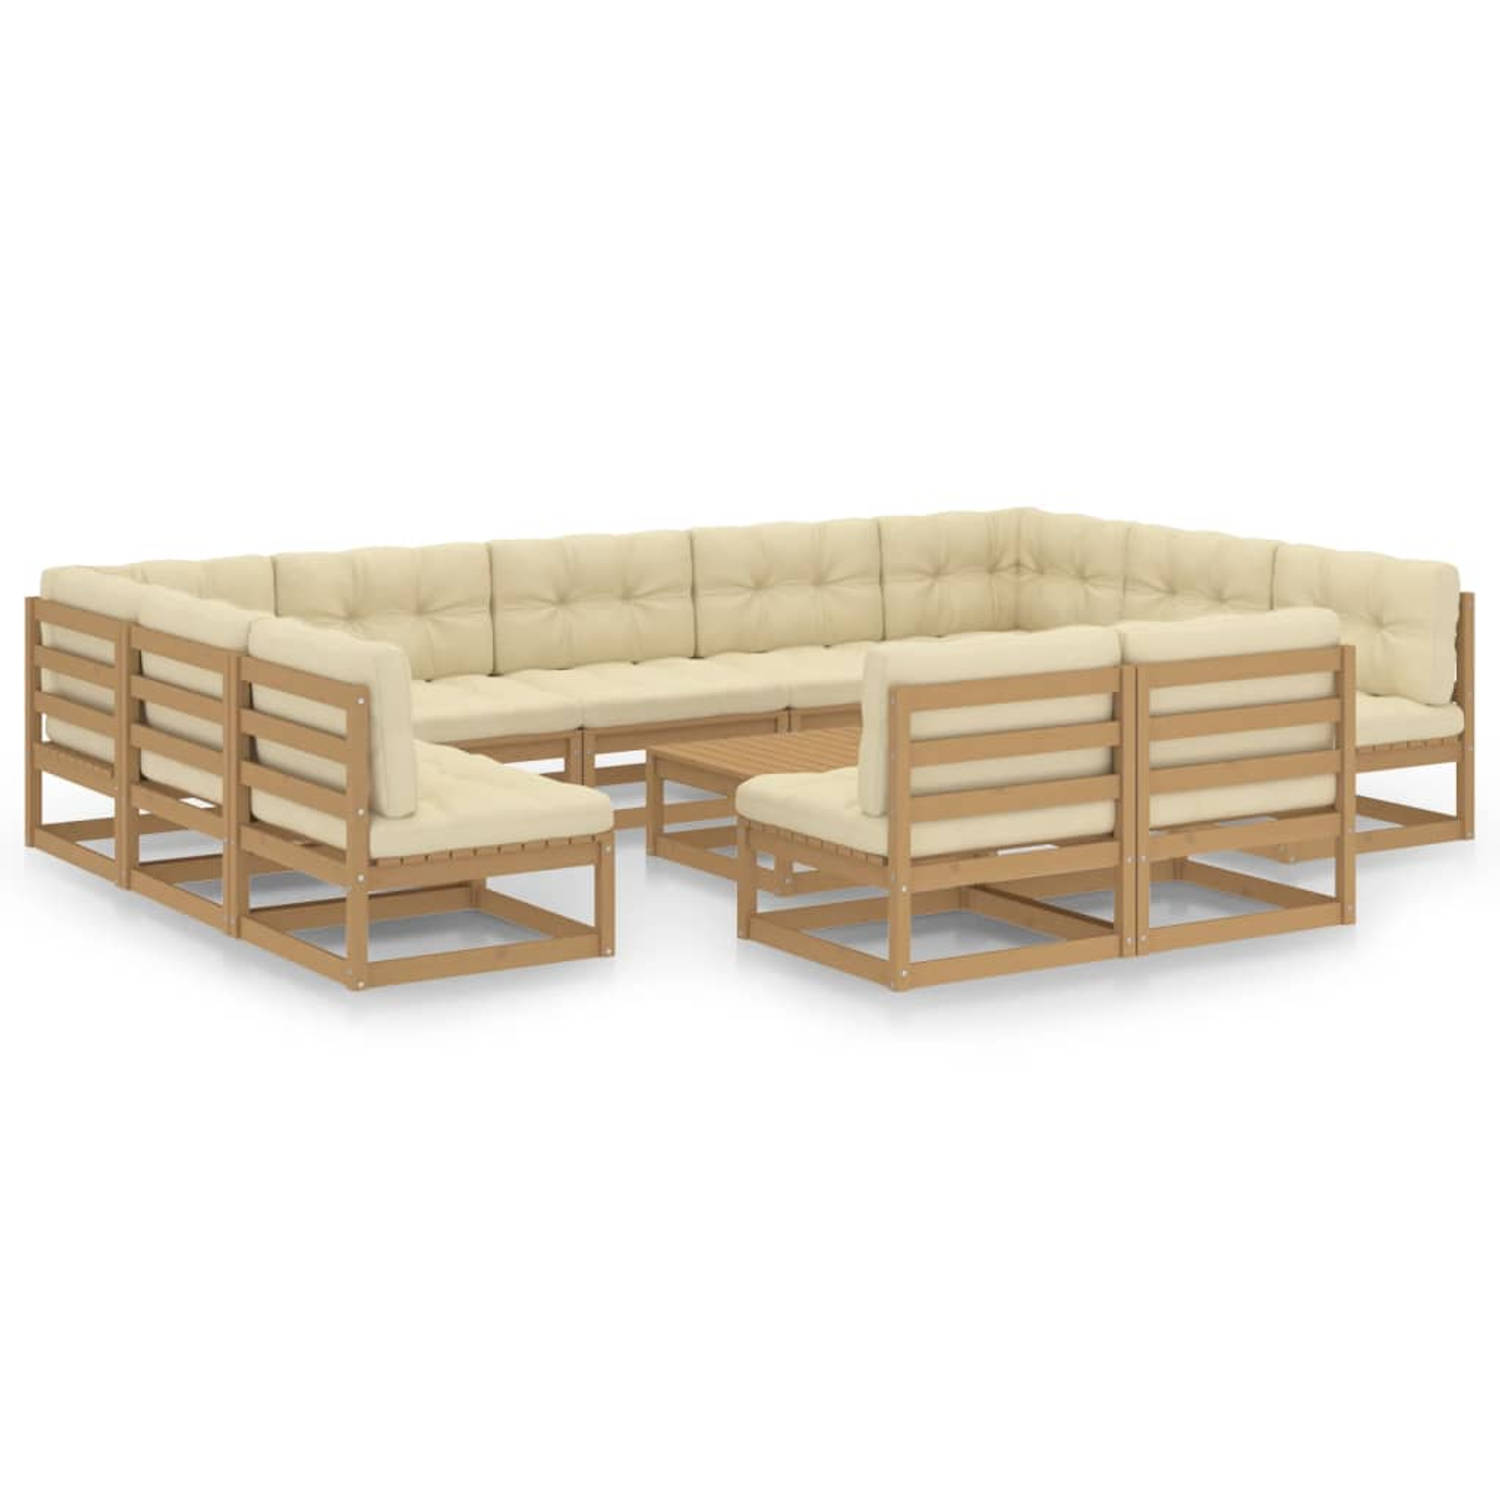 The Living Store Loungeset Grenenhout Tuinmeubelen - 70x70x67 cm - Honingbruin - Crème - Polyester